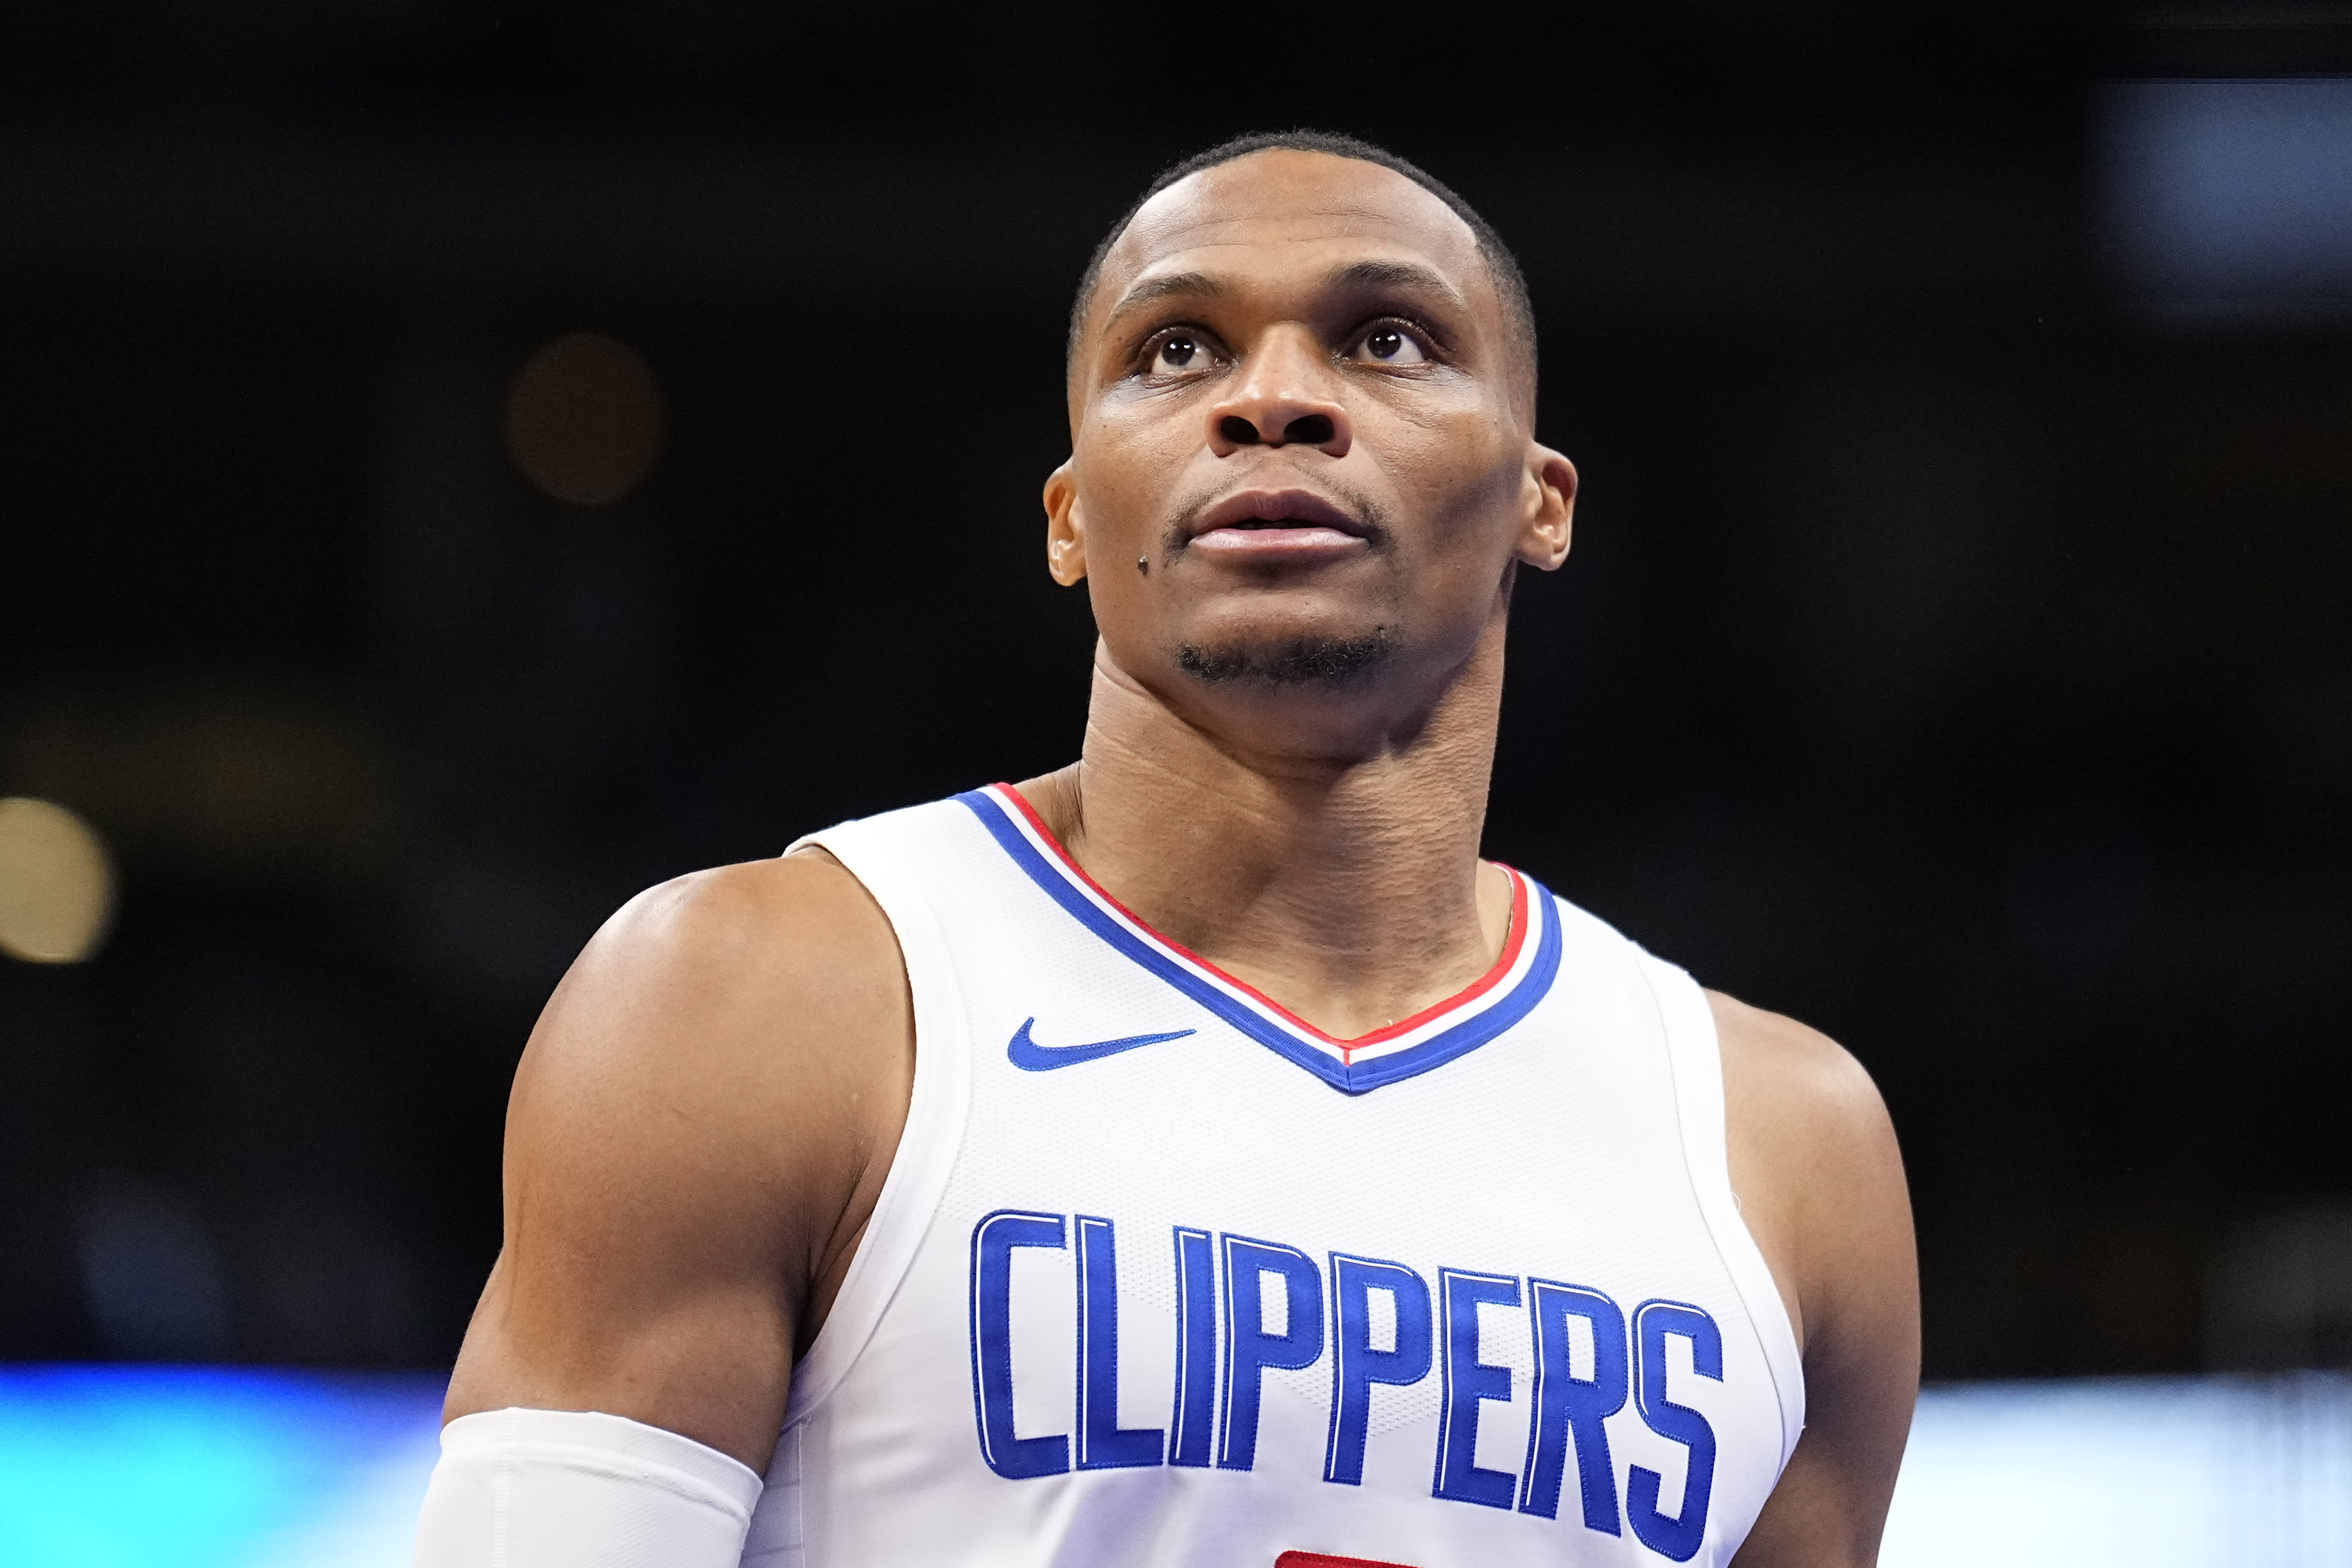 Russell Westbrook to come off bench for Clippers, reportedly per his request